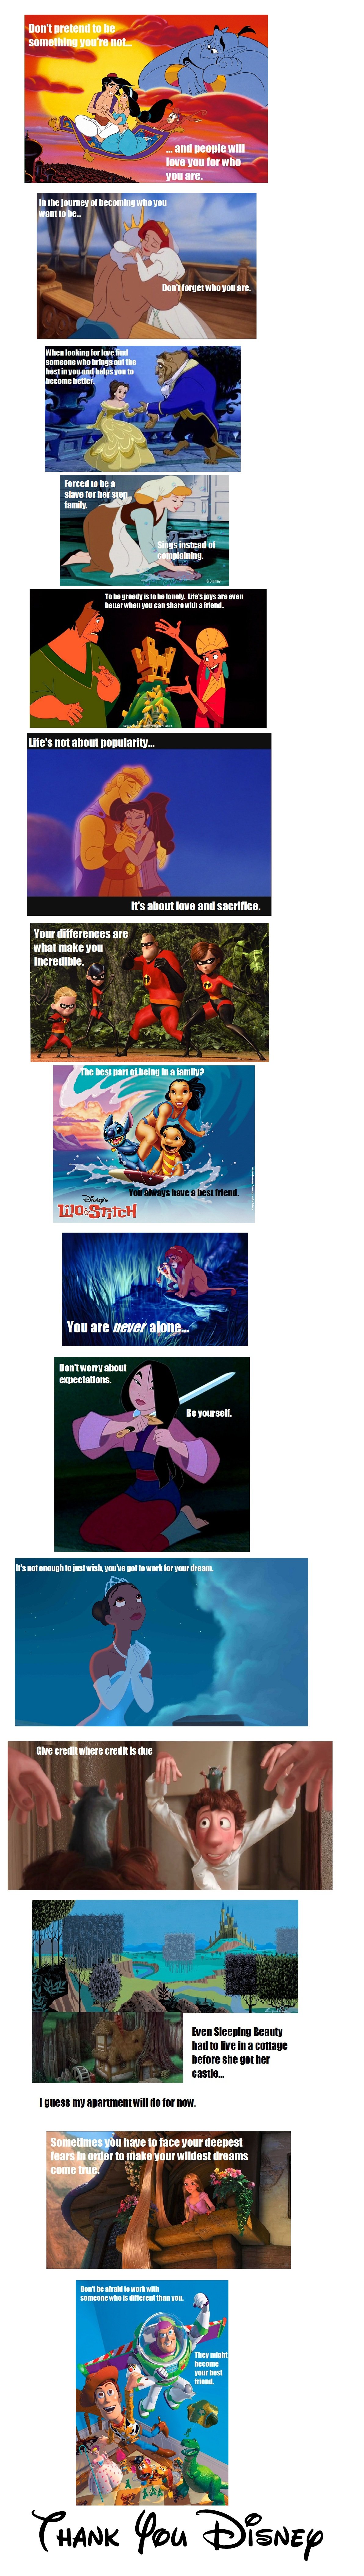 Life Lessons from Disney.